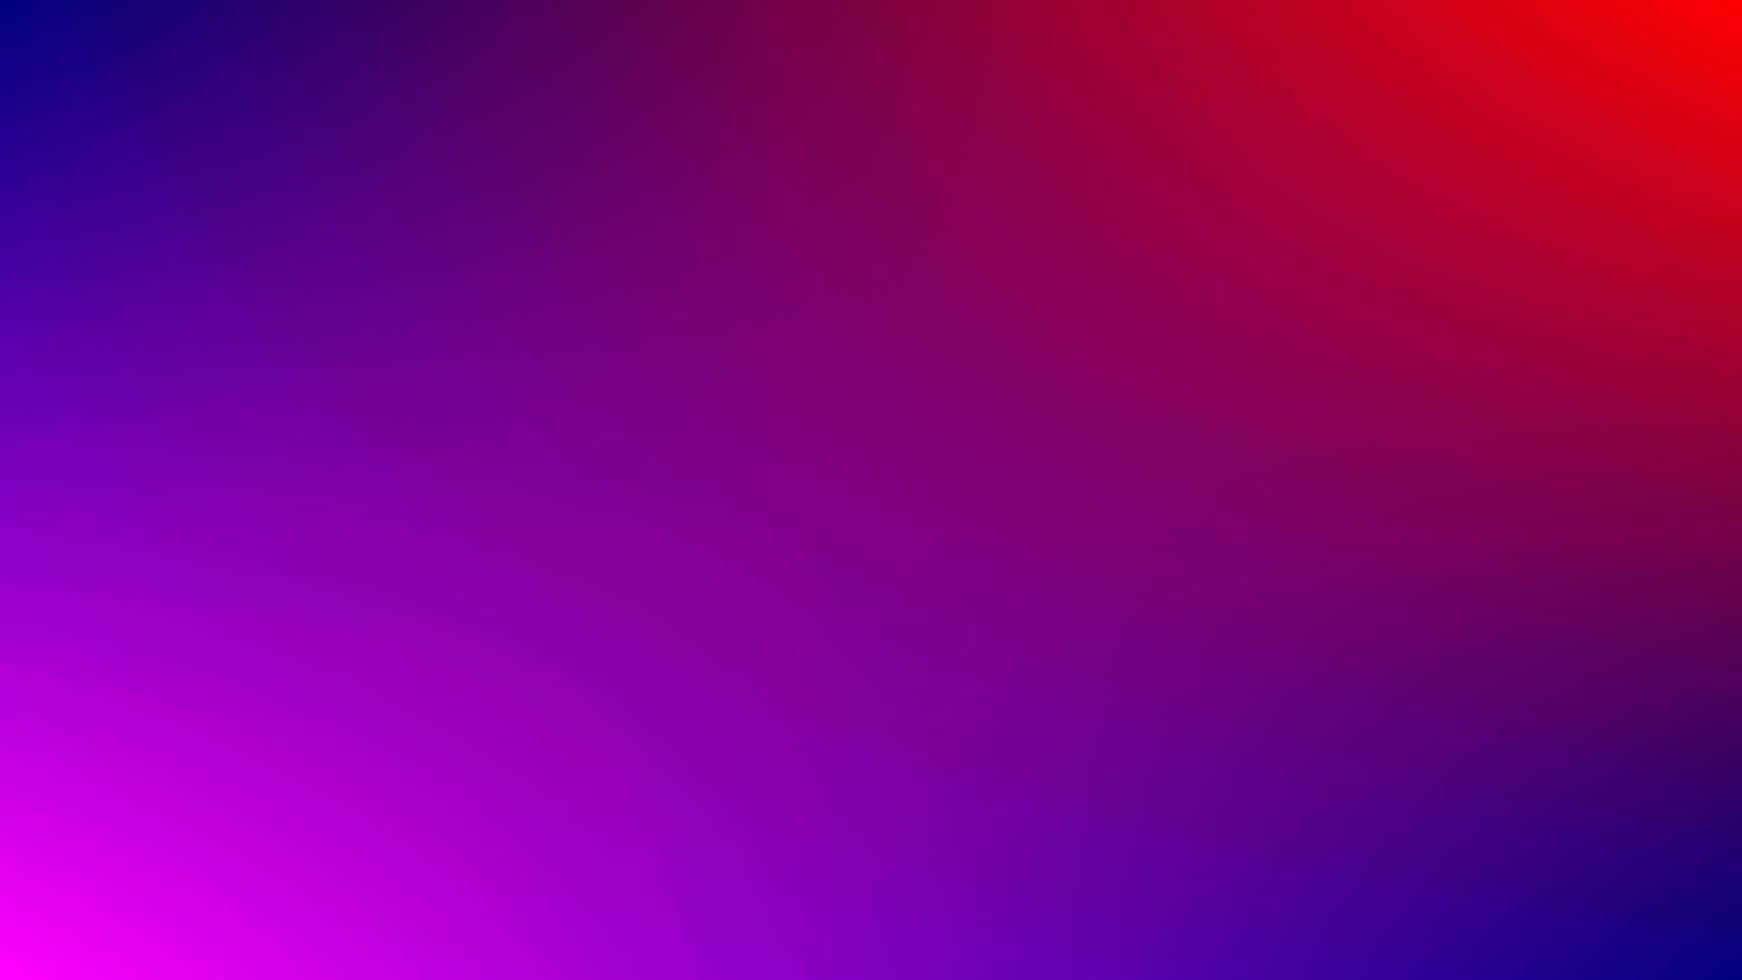 Discover 58+ purple and red wallpapers best - in.cdgdbentre